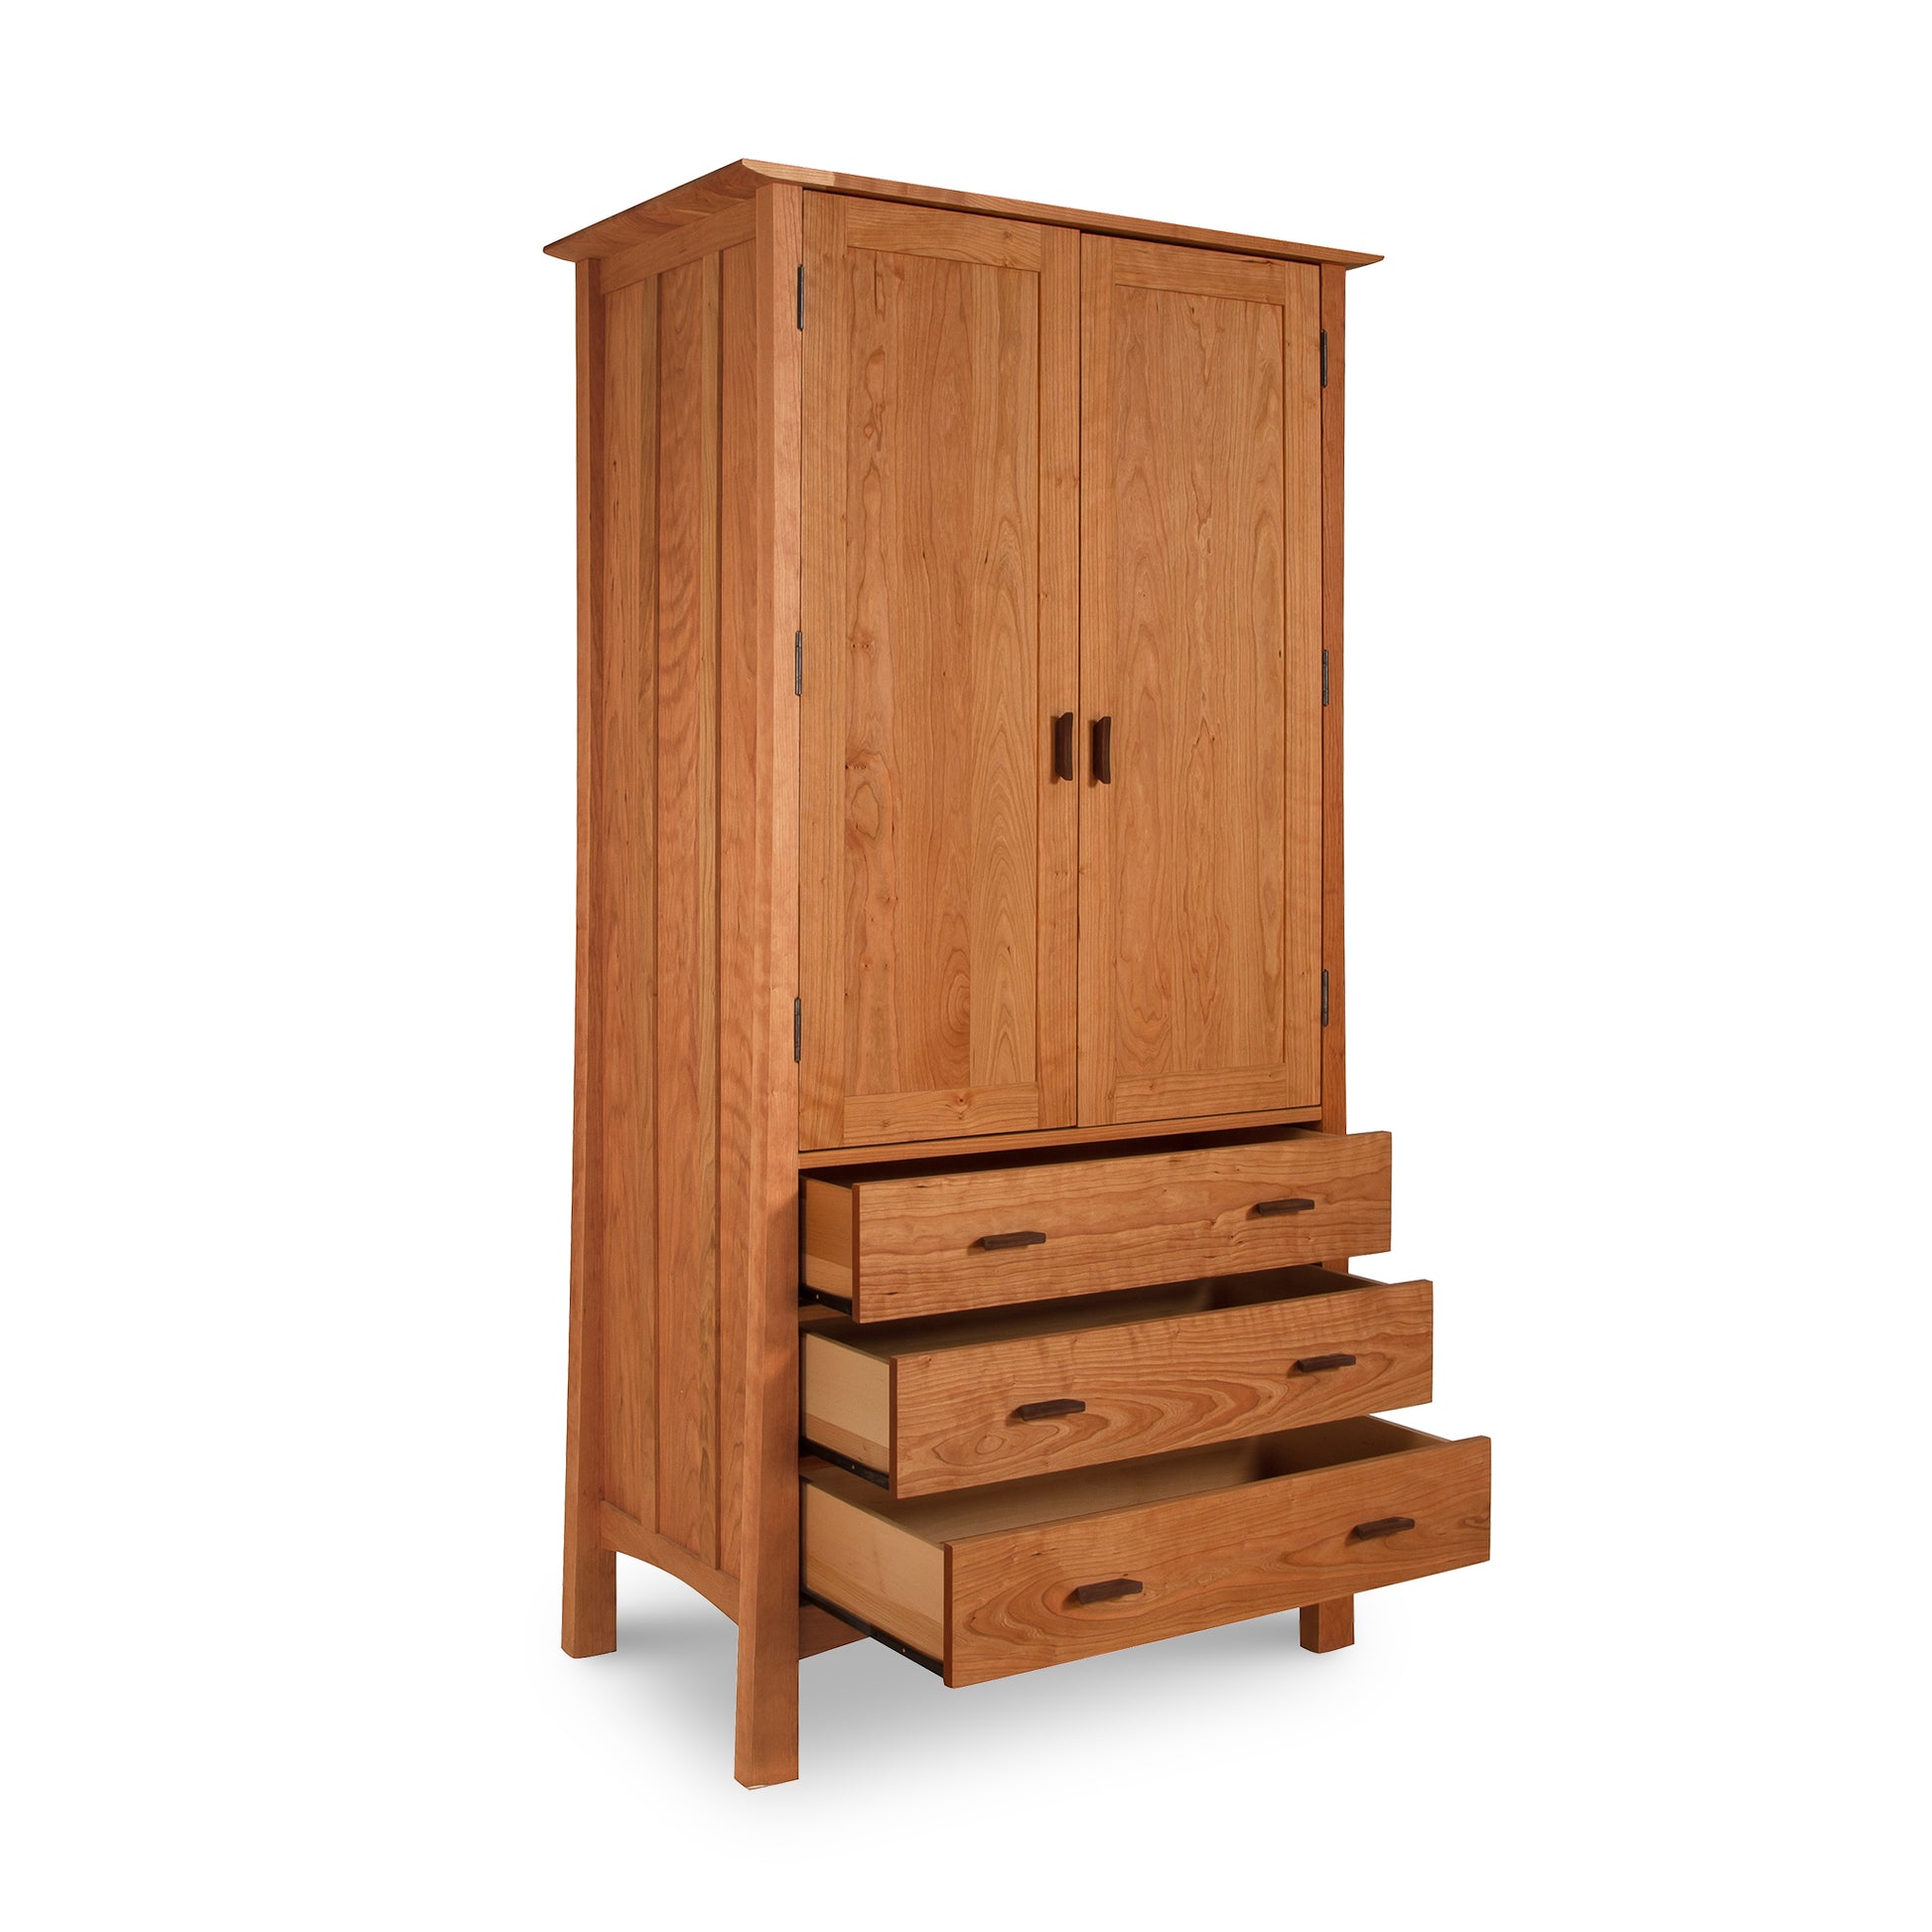 Contemporary Craftsman Tall Armoire by Vermont Furniture Designs, with three open drawers on a white background, showcasing Vermont craftsmanship.